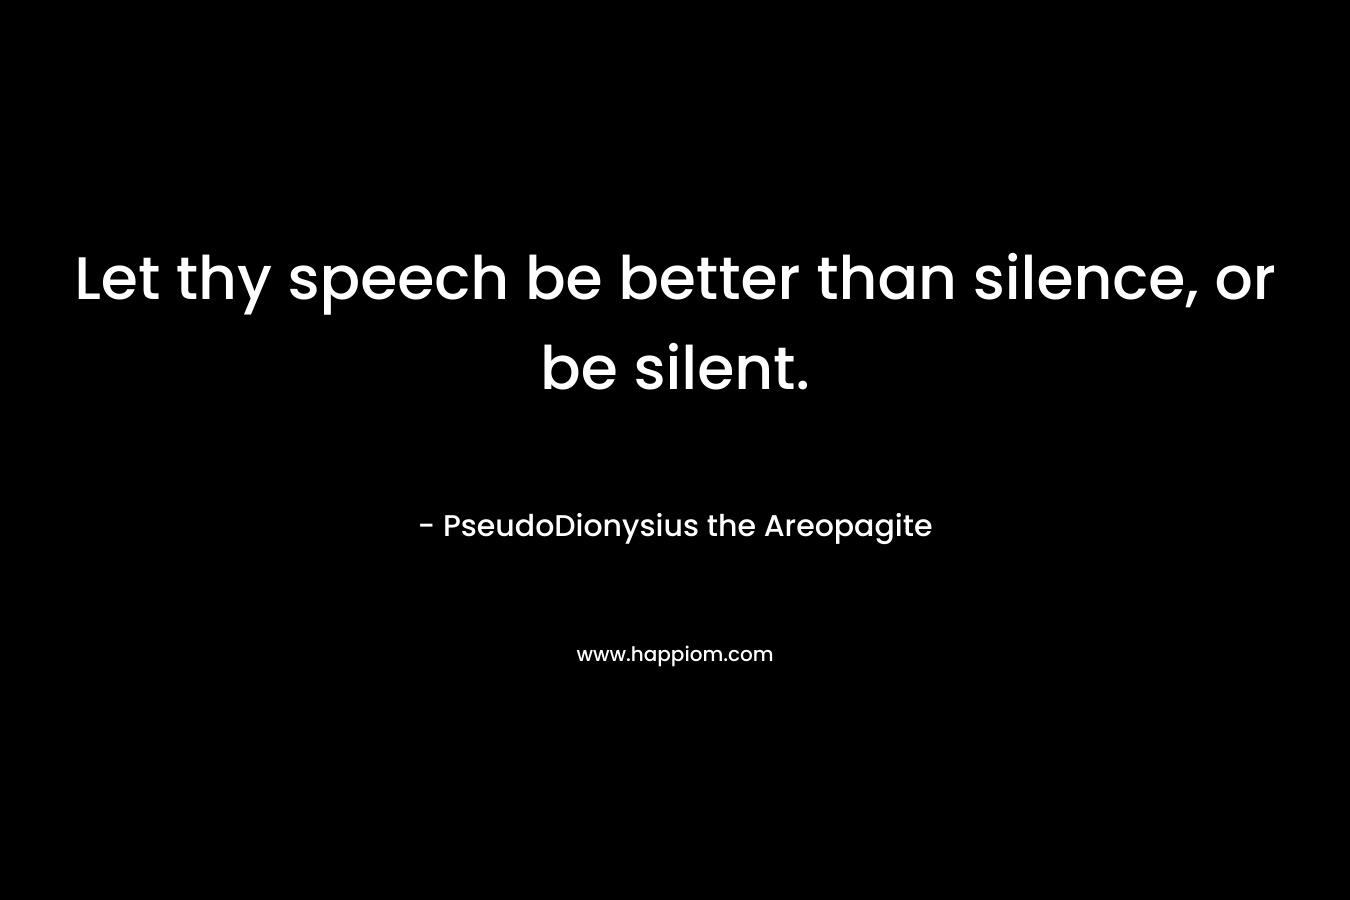 Let thy speech be better than silence, or be silent. – PseudoDionysius the Areopagite